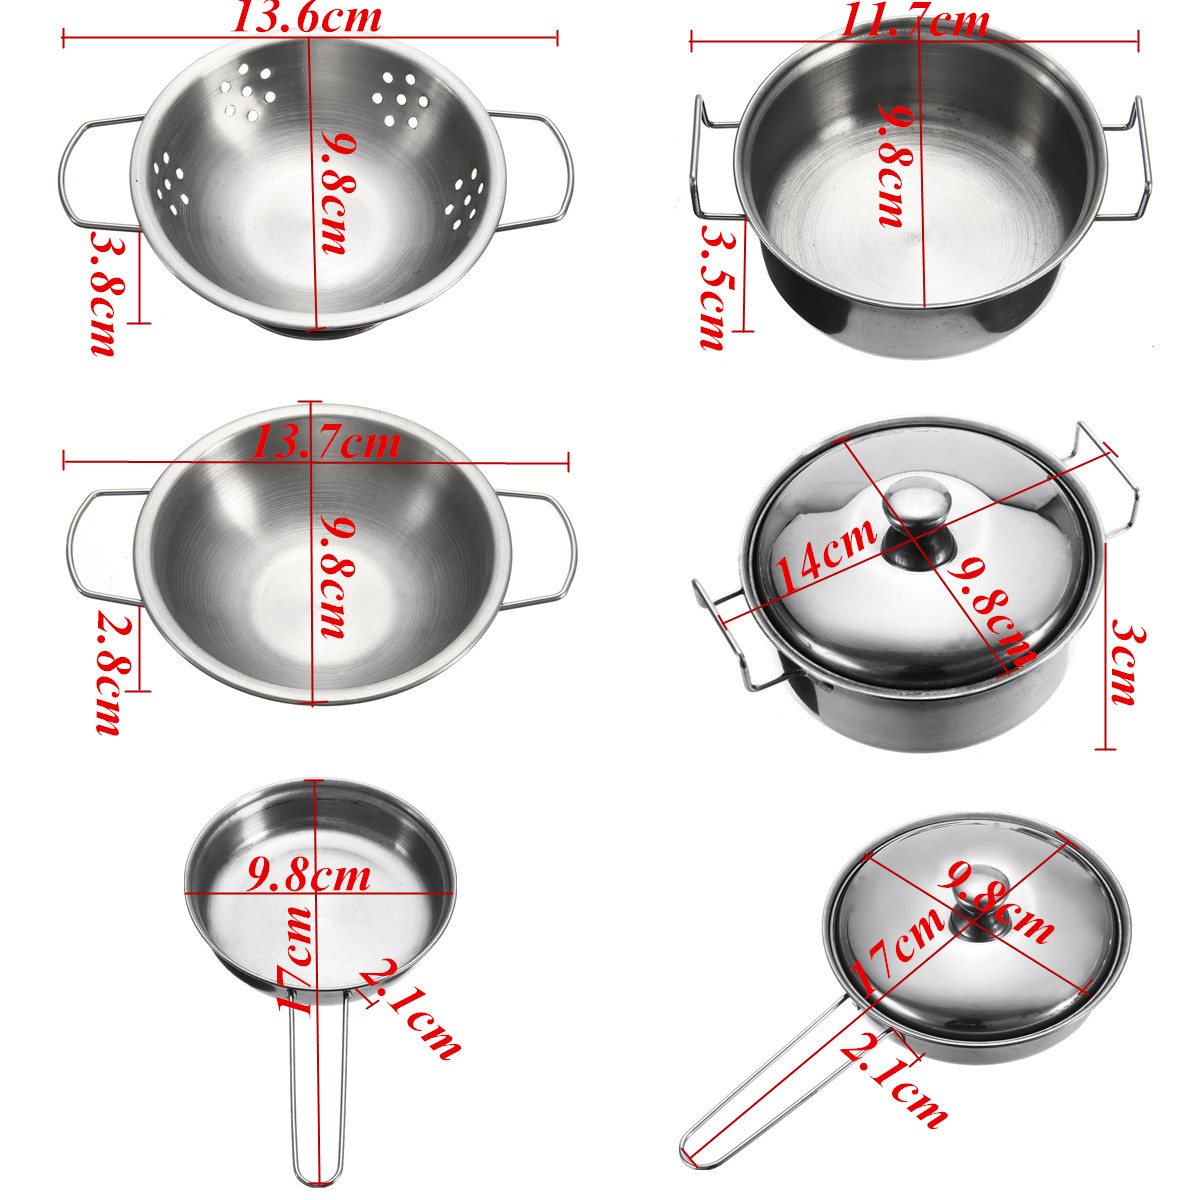 10pc-Stainless-steel-Cookware-Kitchen-Cooking-Set-Pot-Pans-House-Play-Toy-For-Children-1418086-12